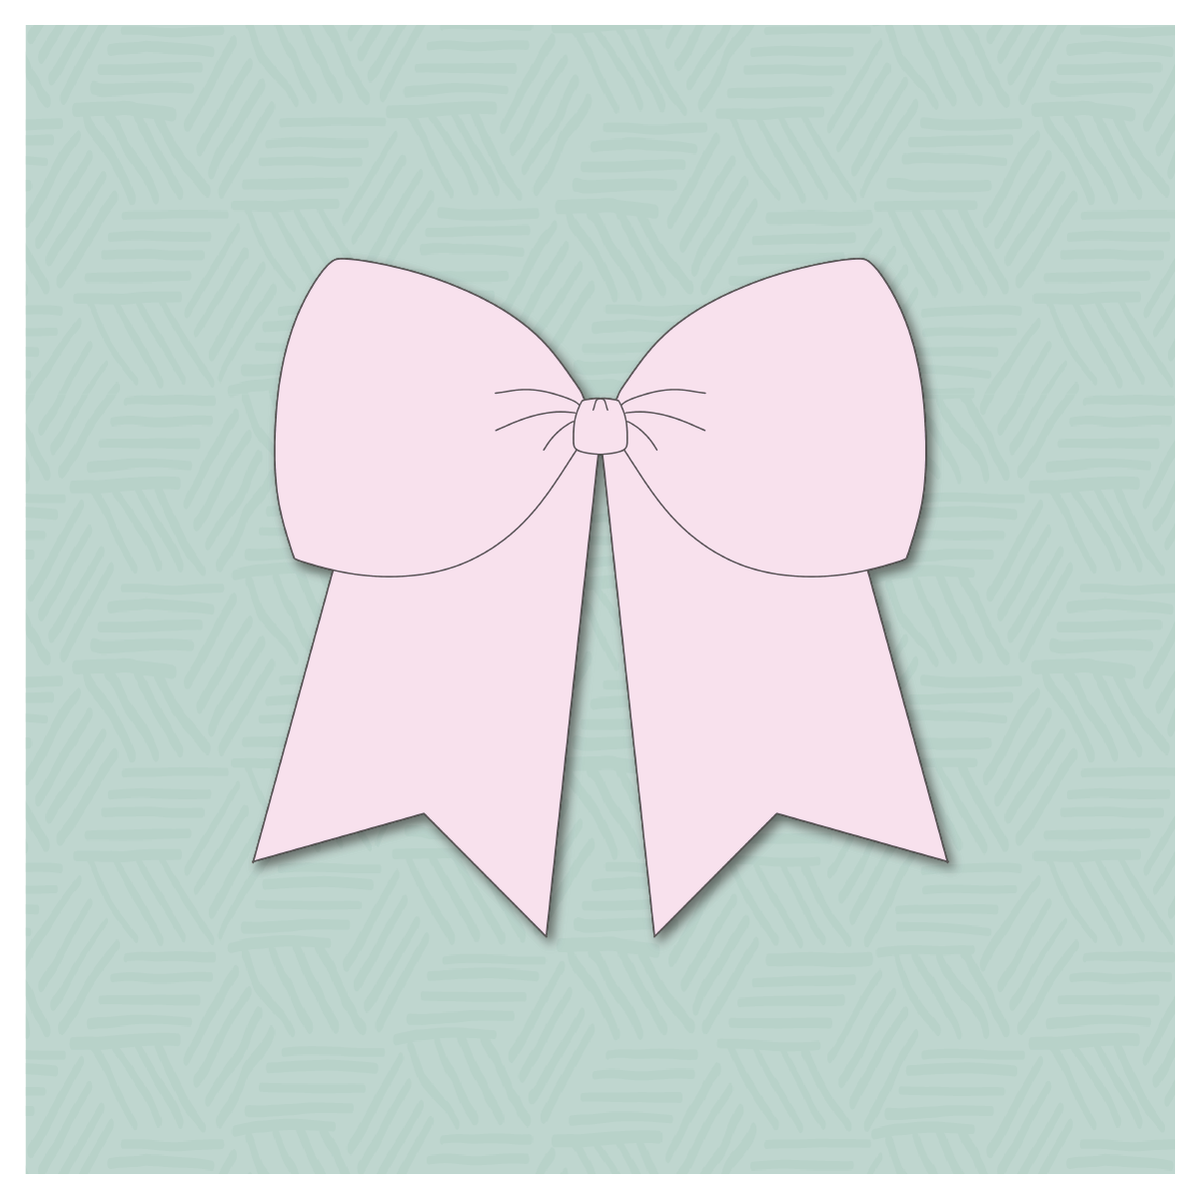 Cheer Bow 2 Cookie Cutter